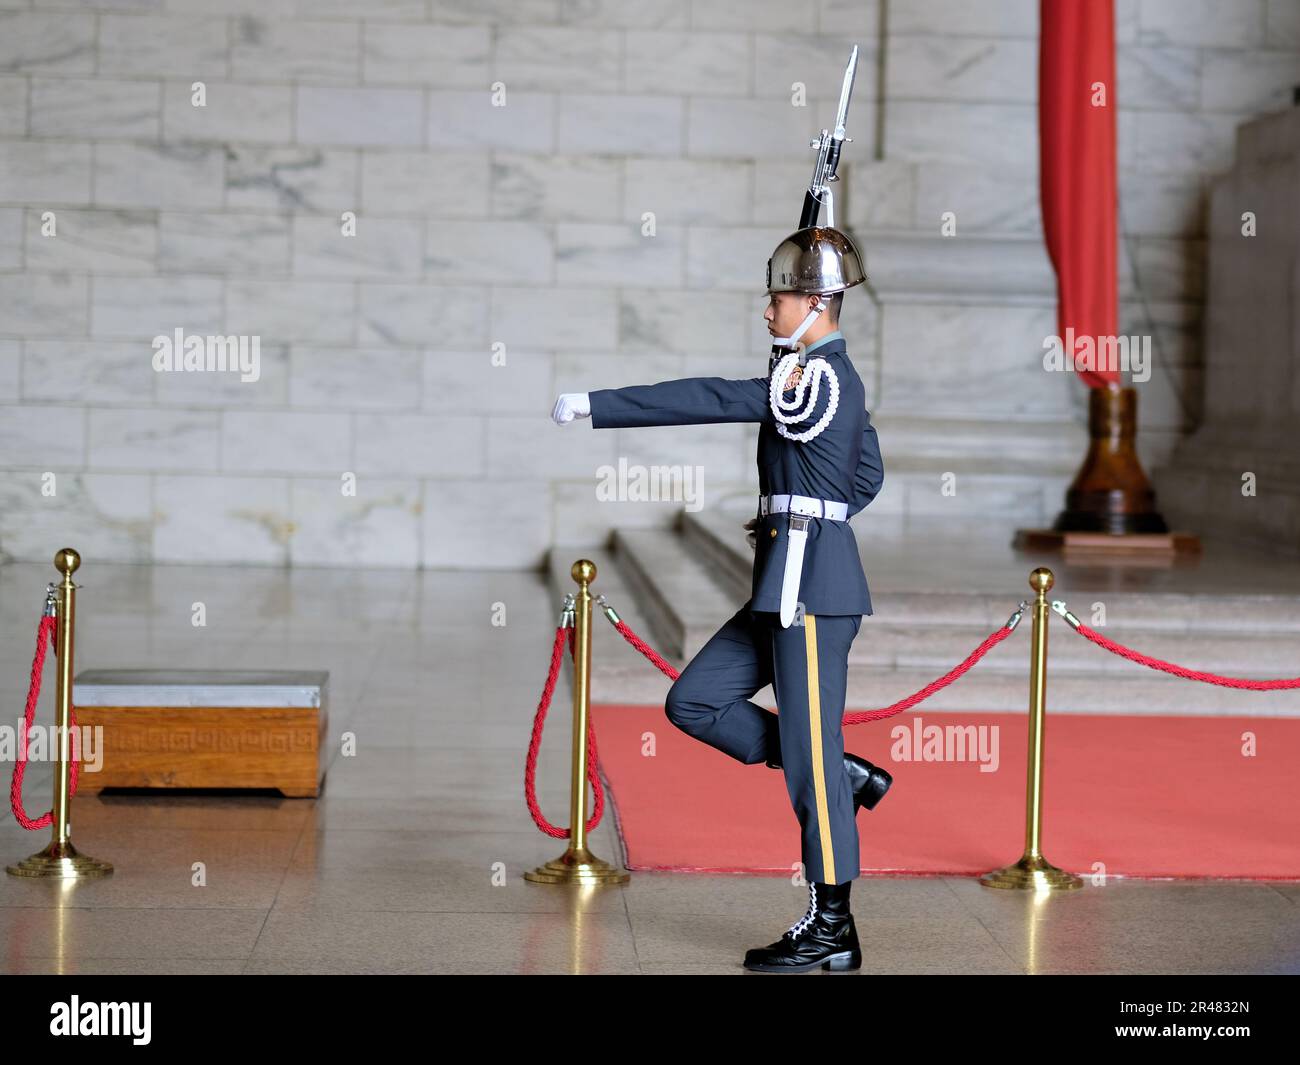 Changing of the guard ceremony at the bronze statue of Chiang Kai-Shek in the main chamber at the Chiang Kai-shek Memorial Hall; Taipei, Taiwan. Stock Photo